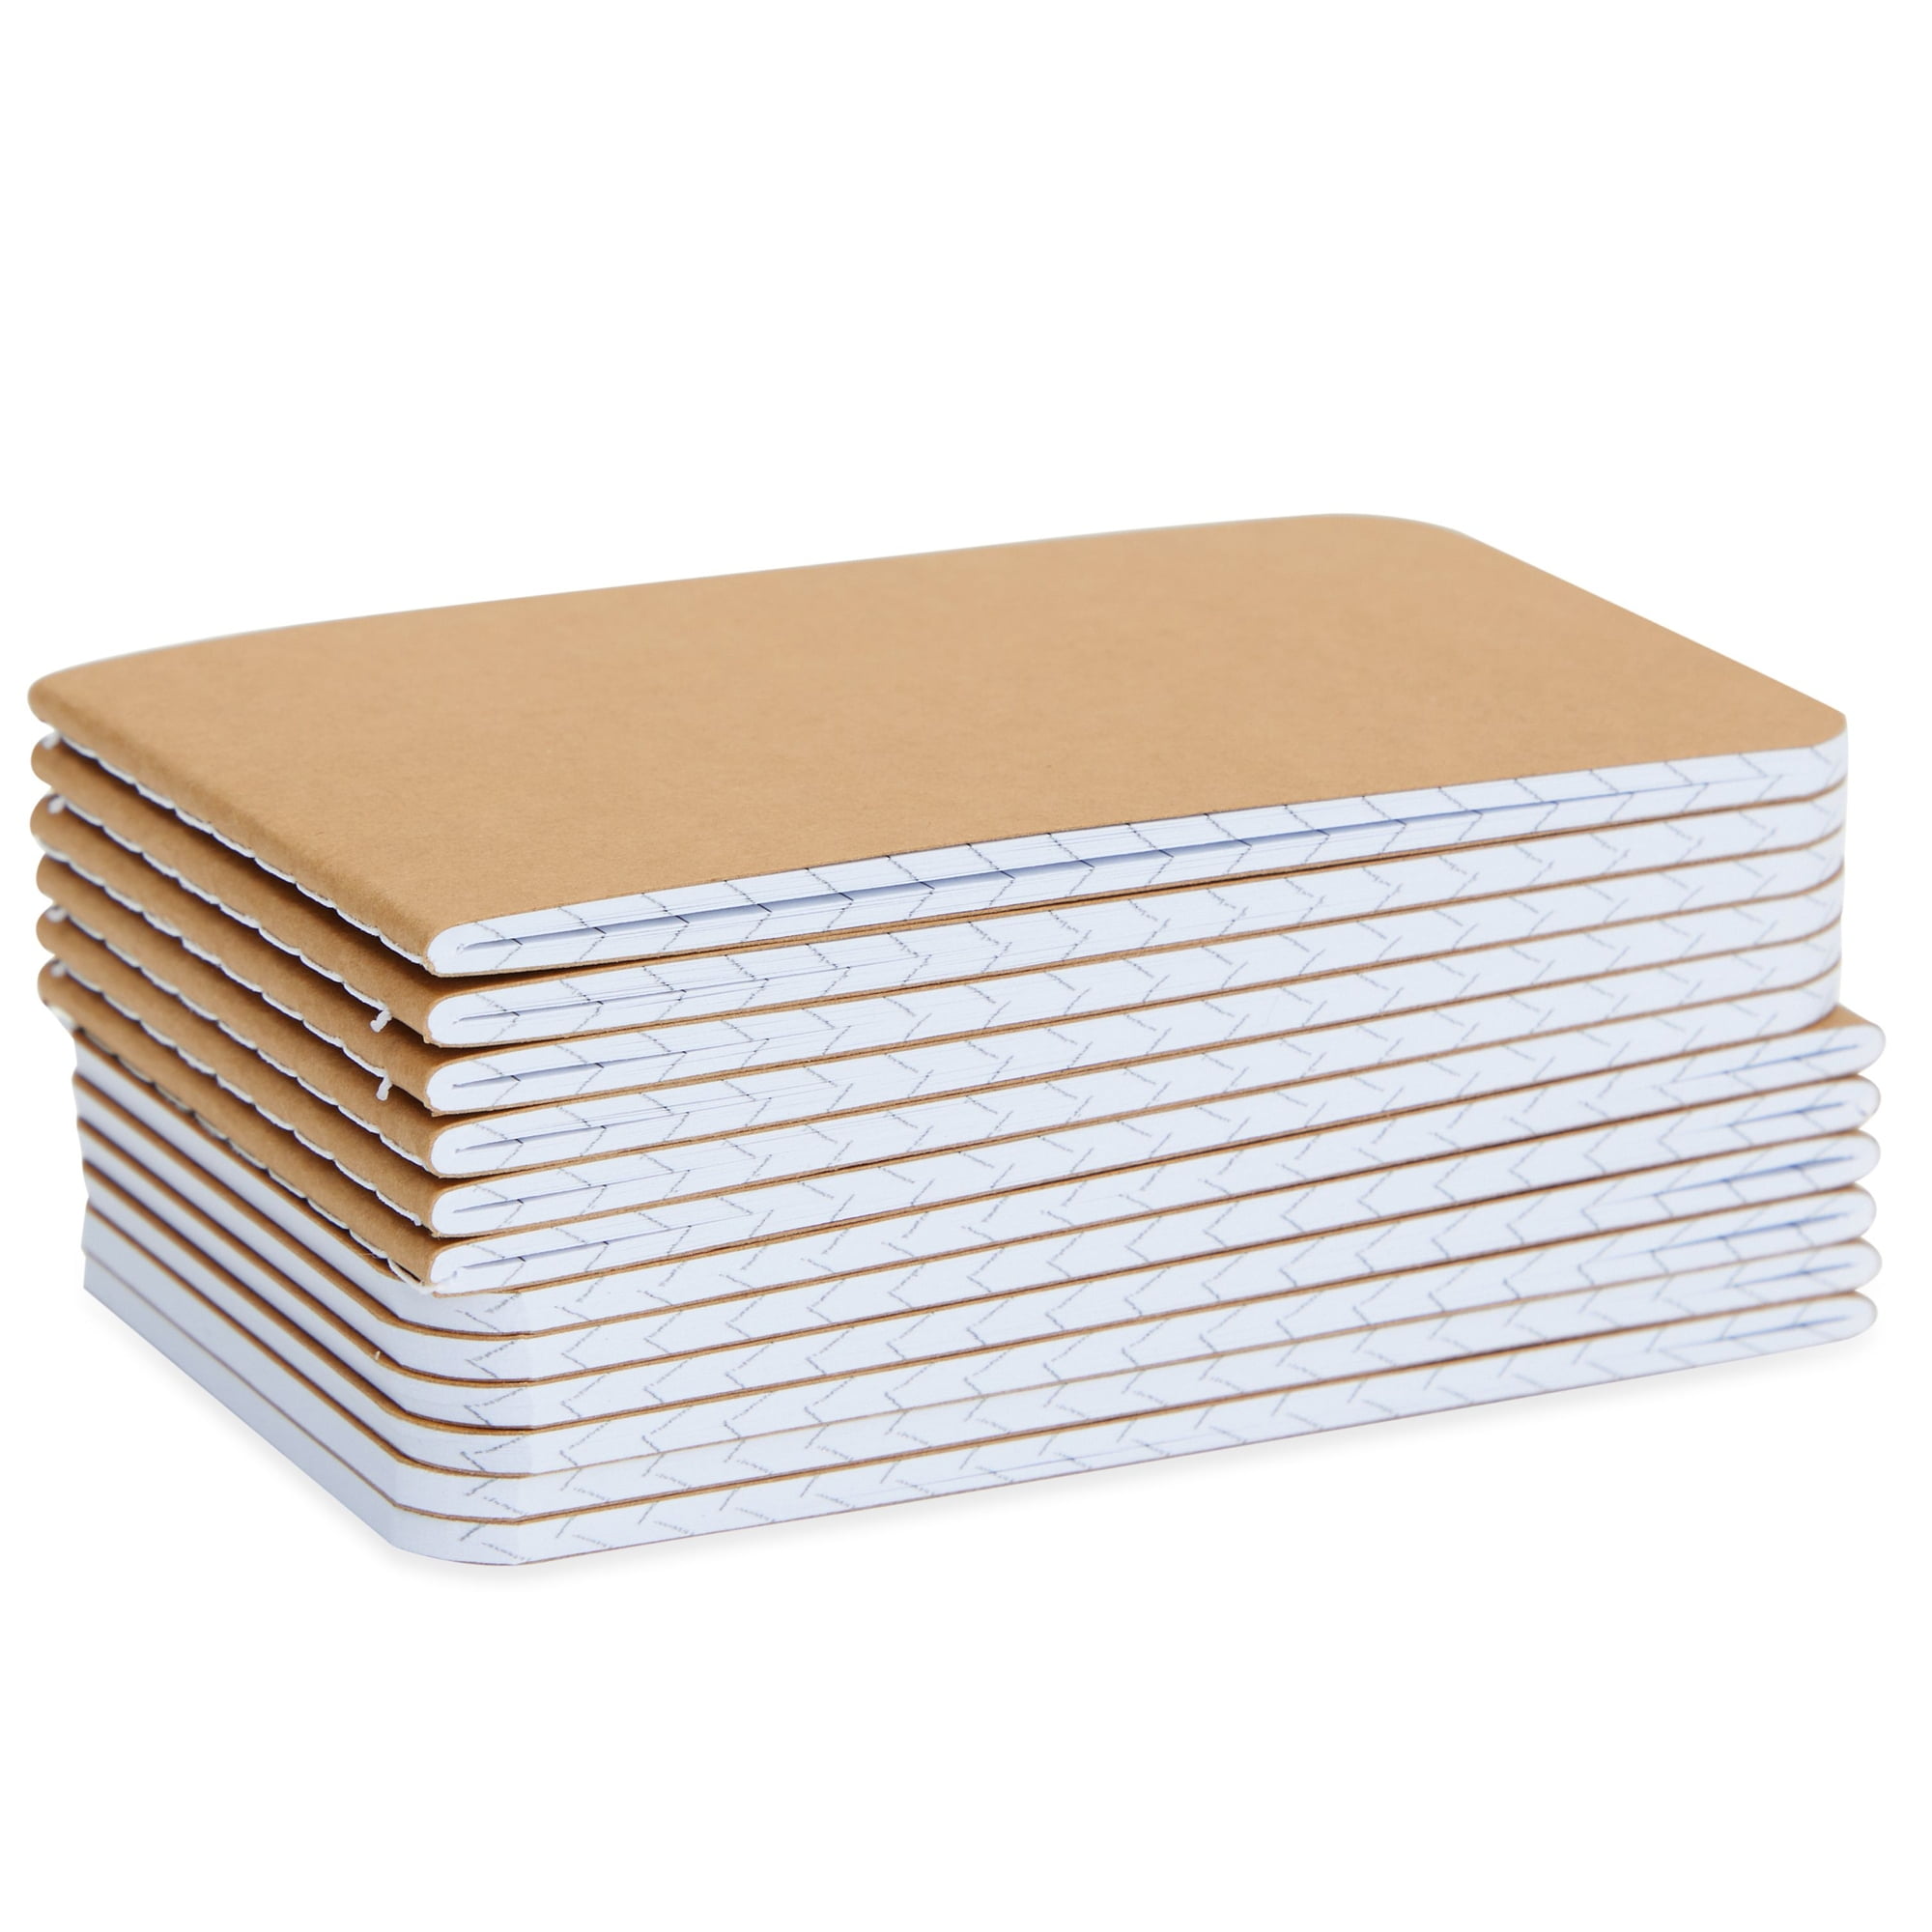  12pcs Inspirational Notepads Kraft Paper Notebooks Small  Pocket Notepads ,64 Pages Mini Notebooks Bulk for Party School Office Home  Coworkers Travel Gift Present Supplies (12pcs-6styles, Brown) : Office  Products